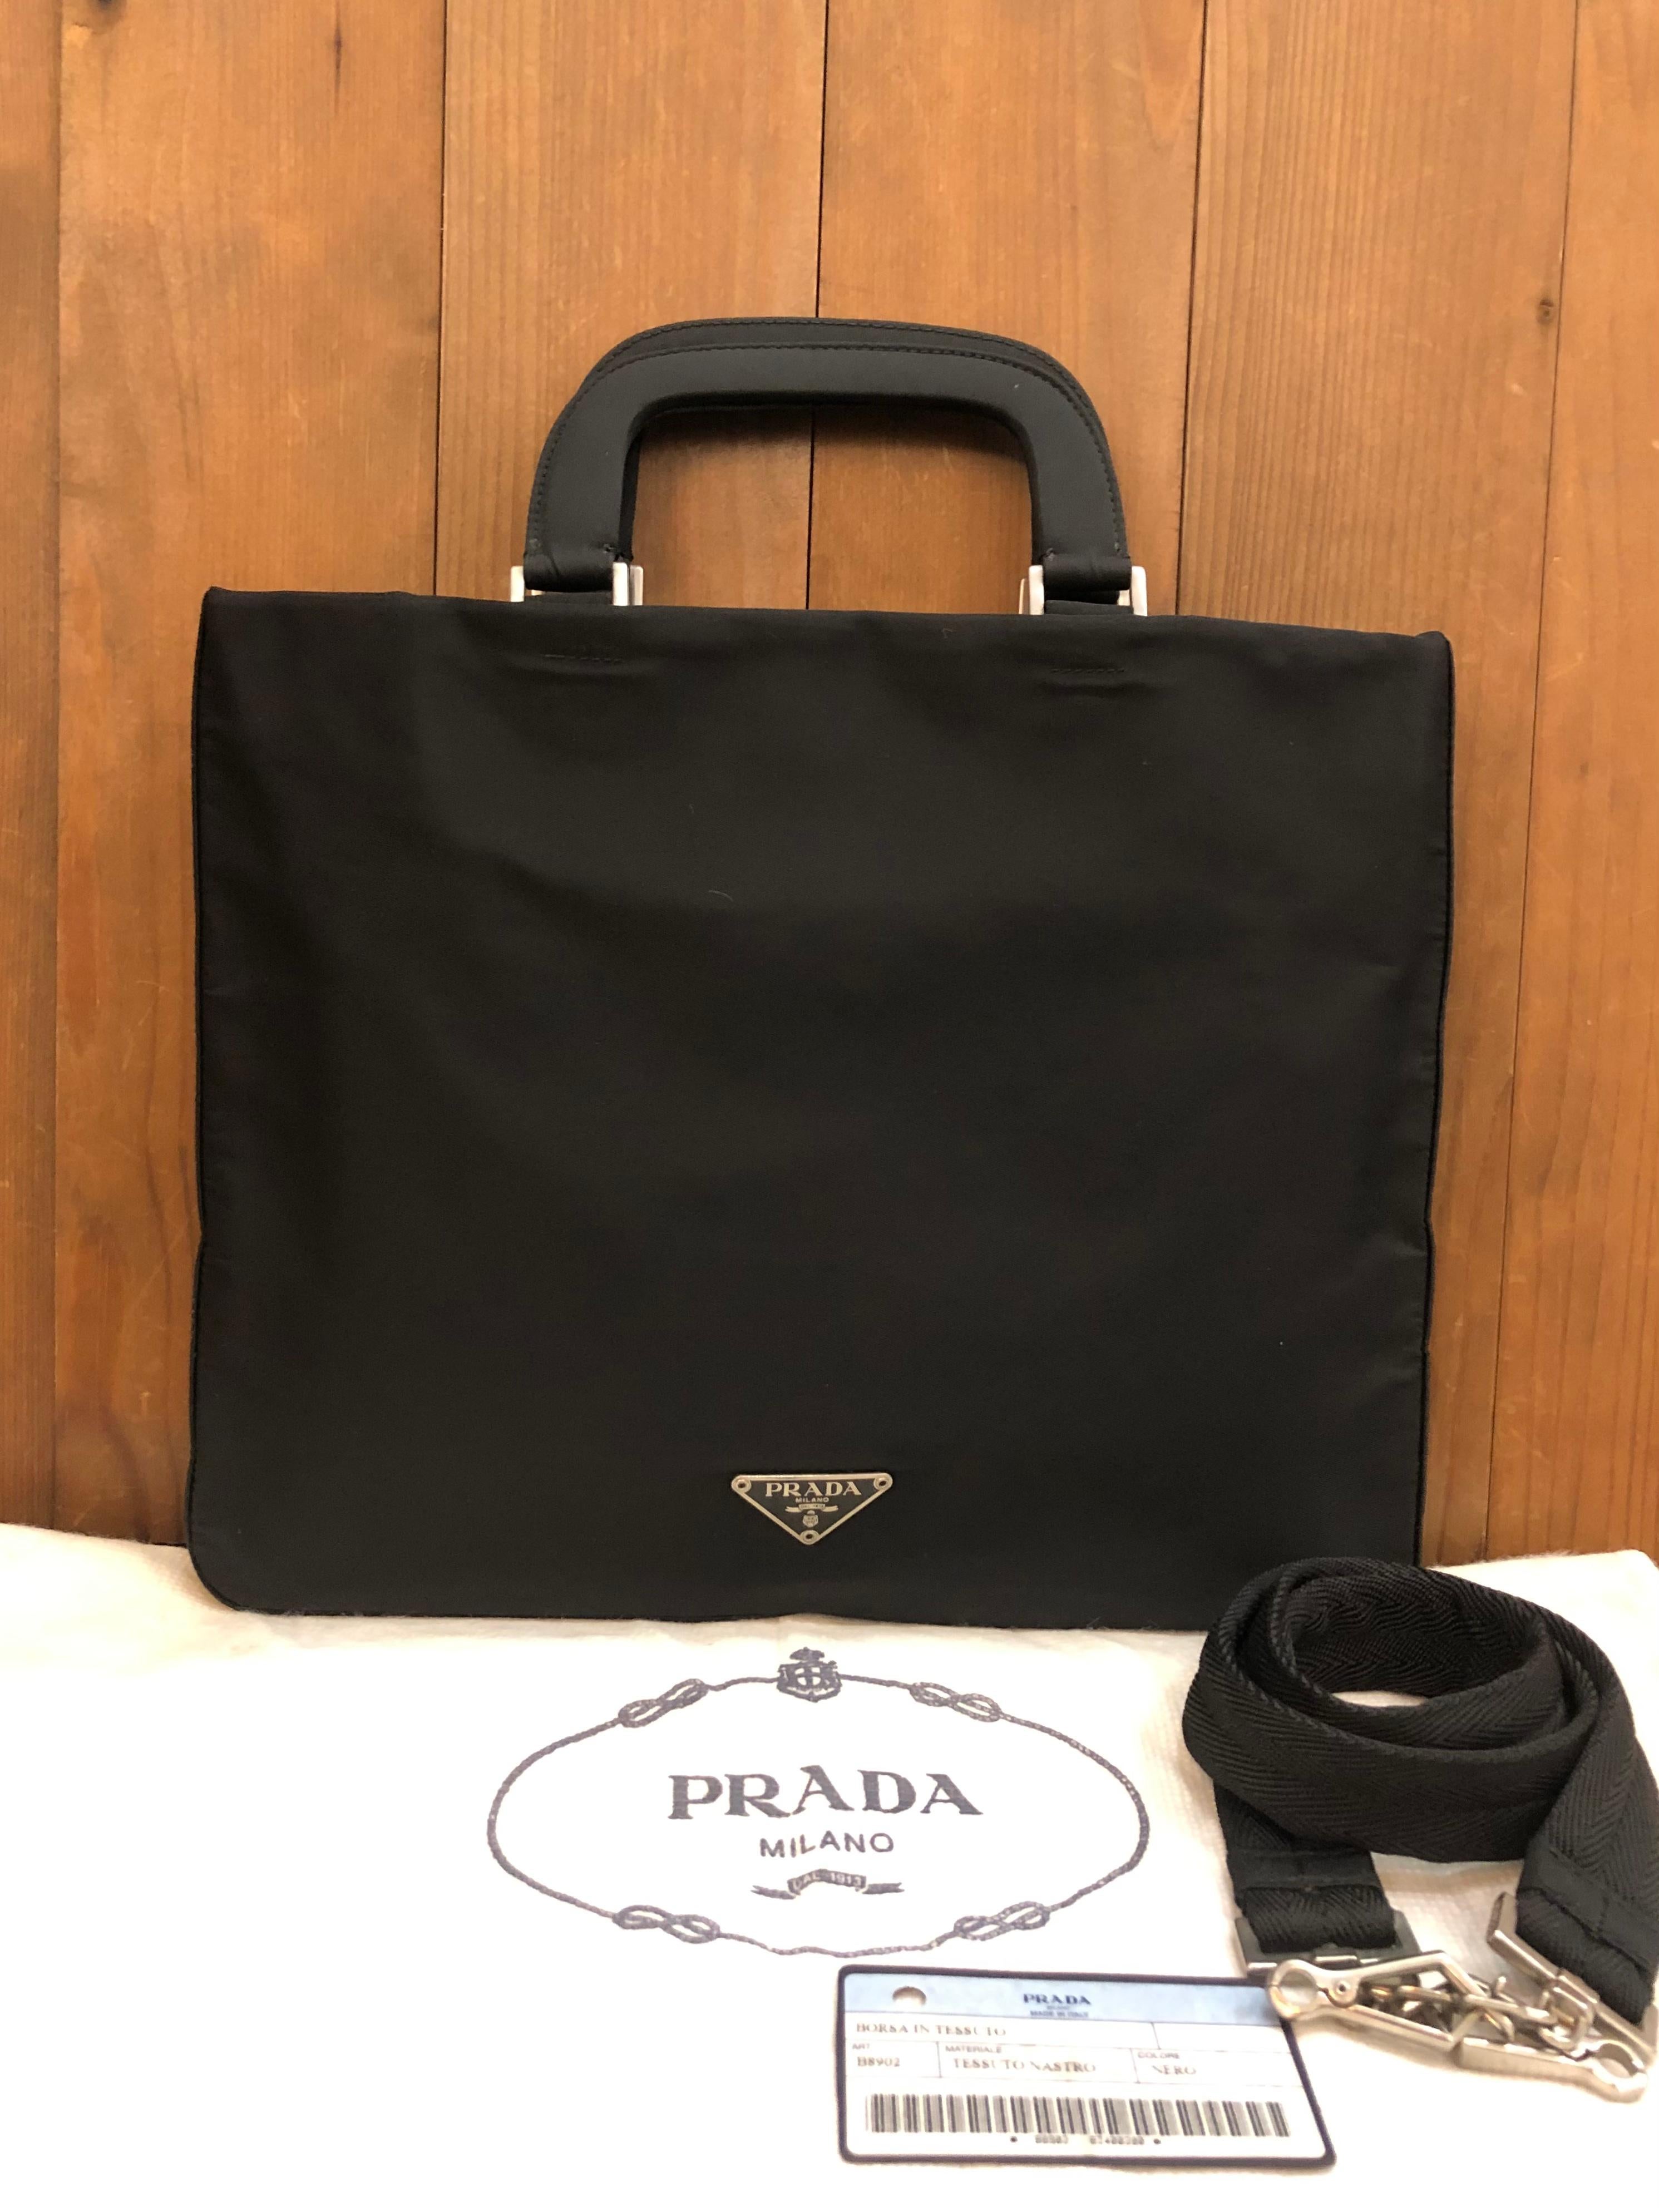 This vintage PRADA small document tote bag is crafted of black Tessuto polyester fabric and stainless steel hardware. This Prada document tote features a interior zippered pocket. It is the perfect mini bag to keep your iPad and small personal